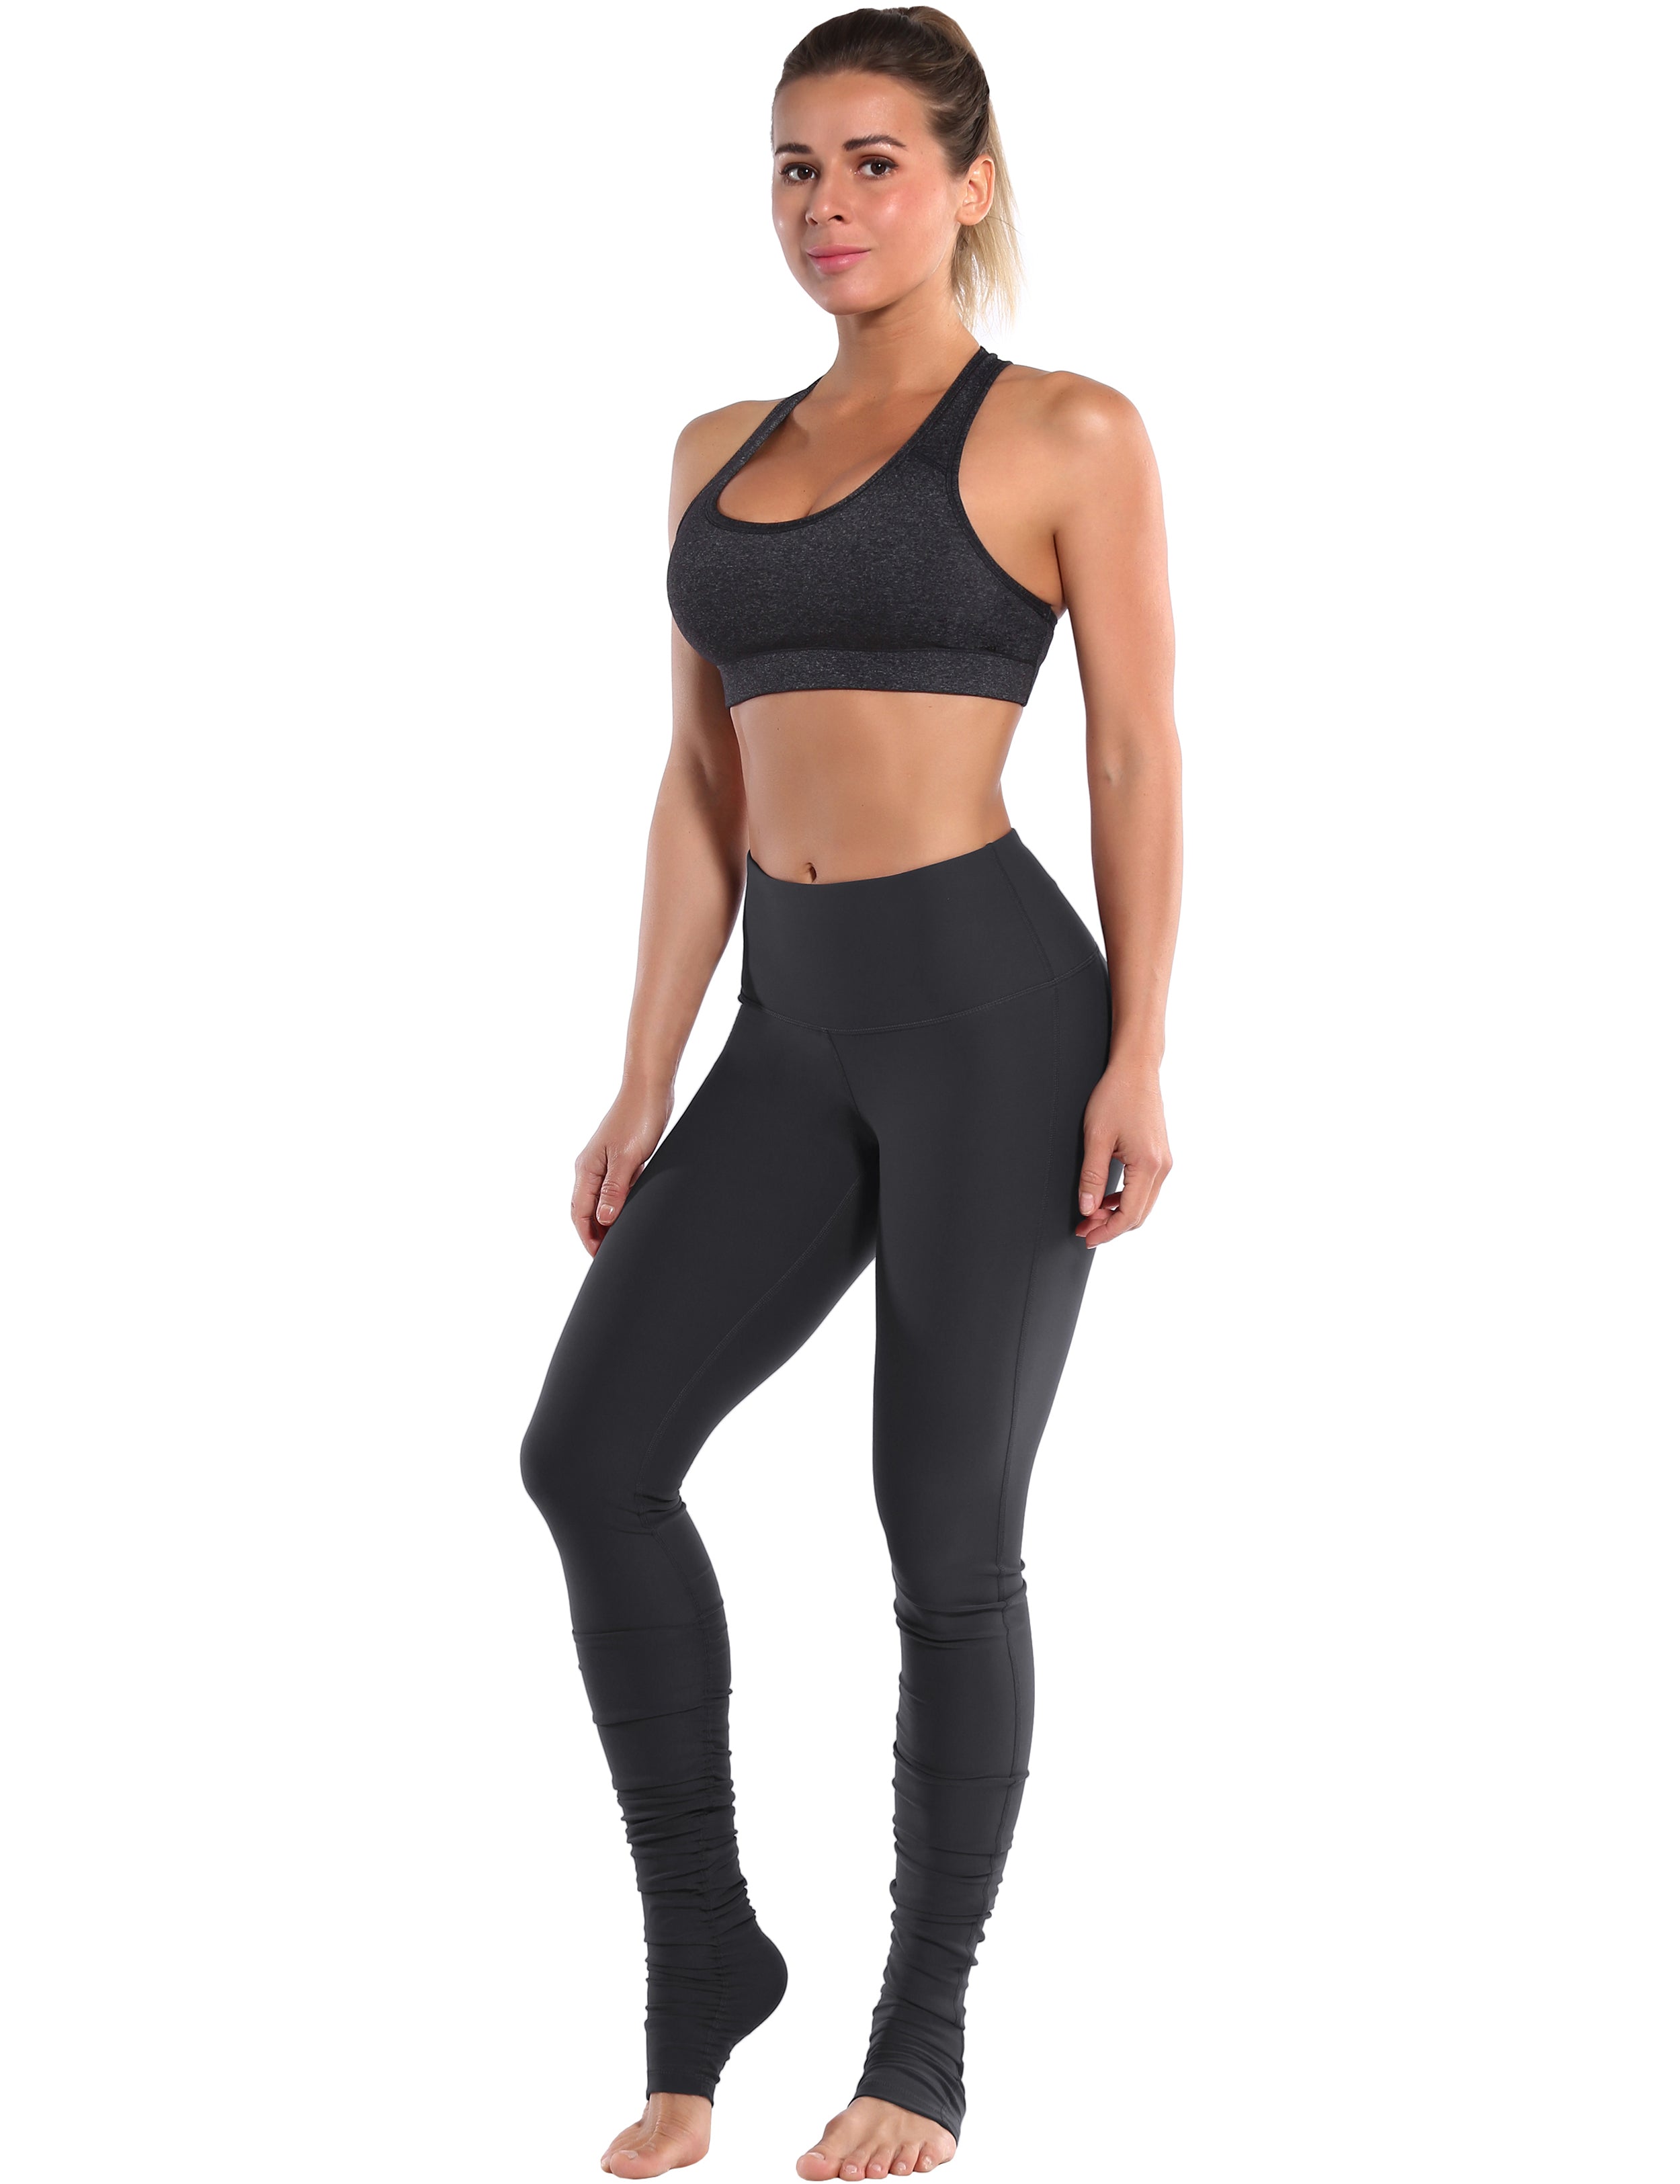 Over the Heel Golf Pants shadowcharcoal Over the Heel Design 87%Nylon/13%Spandex Fabric doesn't attract lint easily 4-way stretch No see-through Moisture-wicking Tummy control